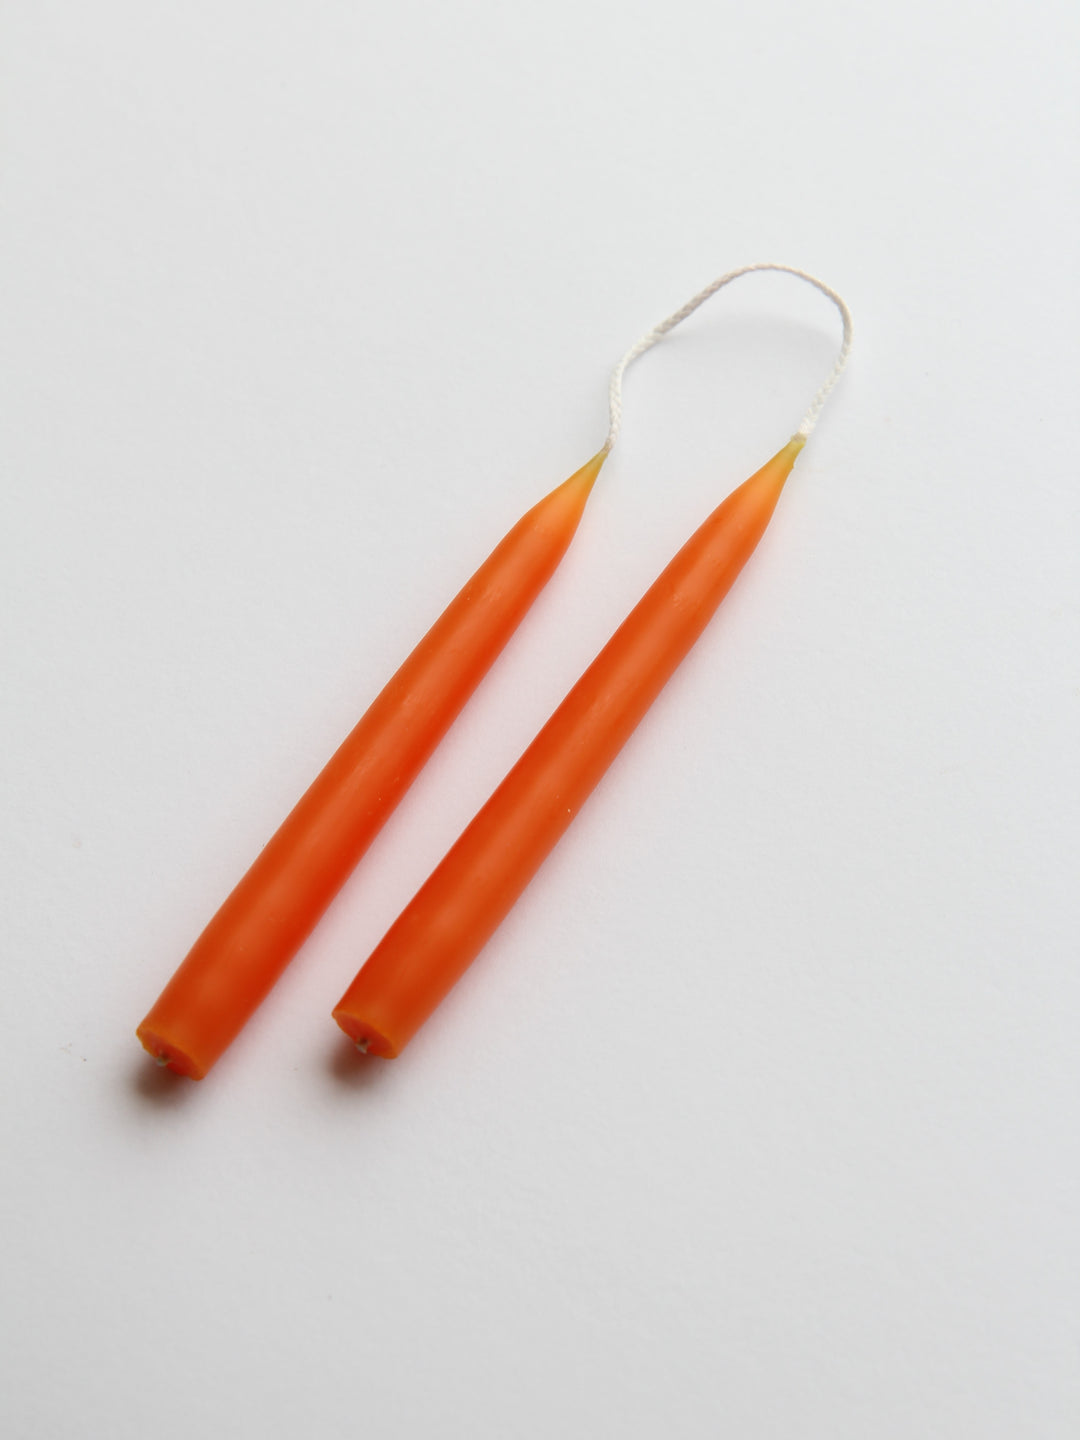 Small Pair of Candles / Orange